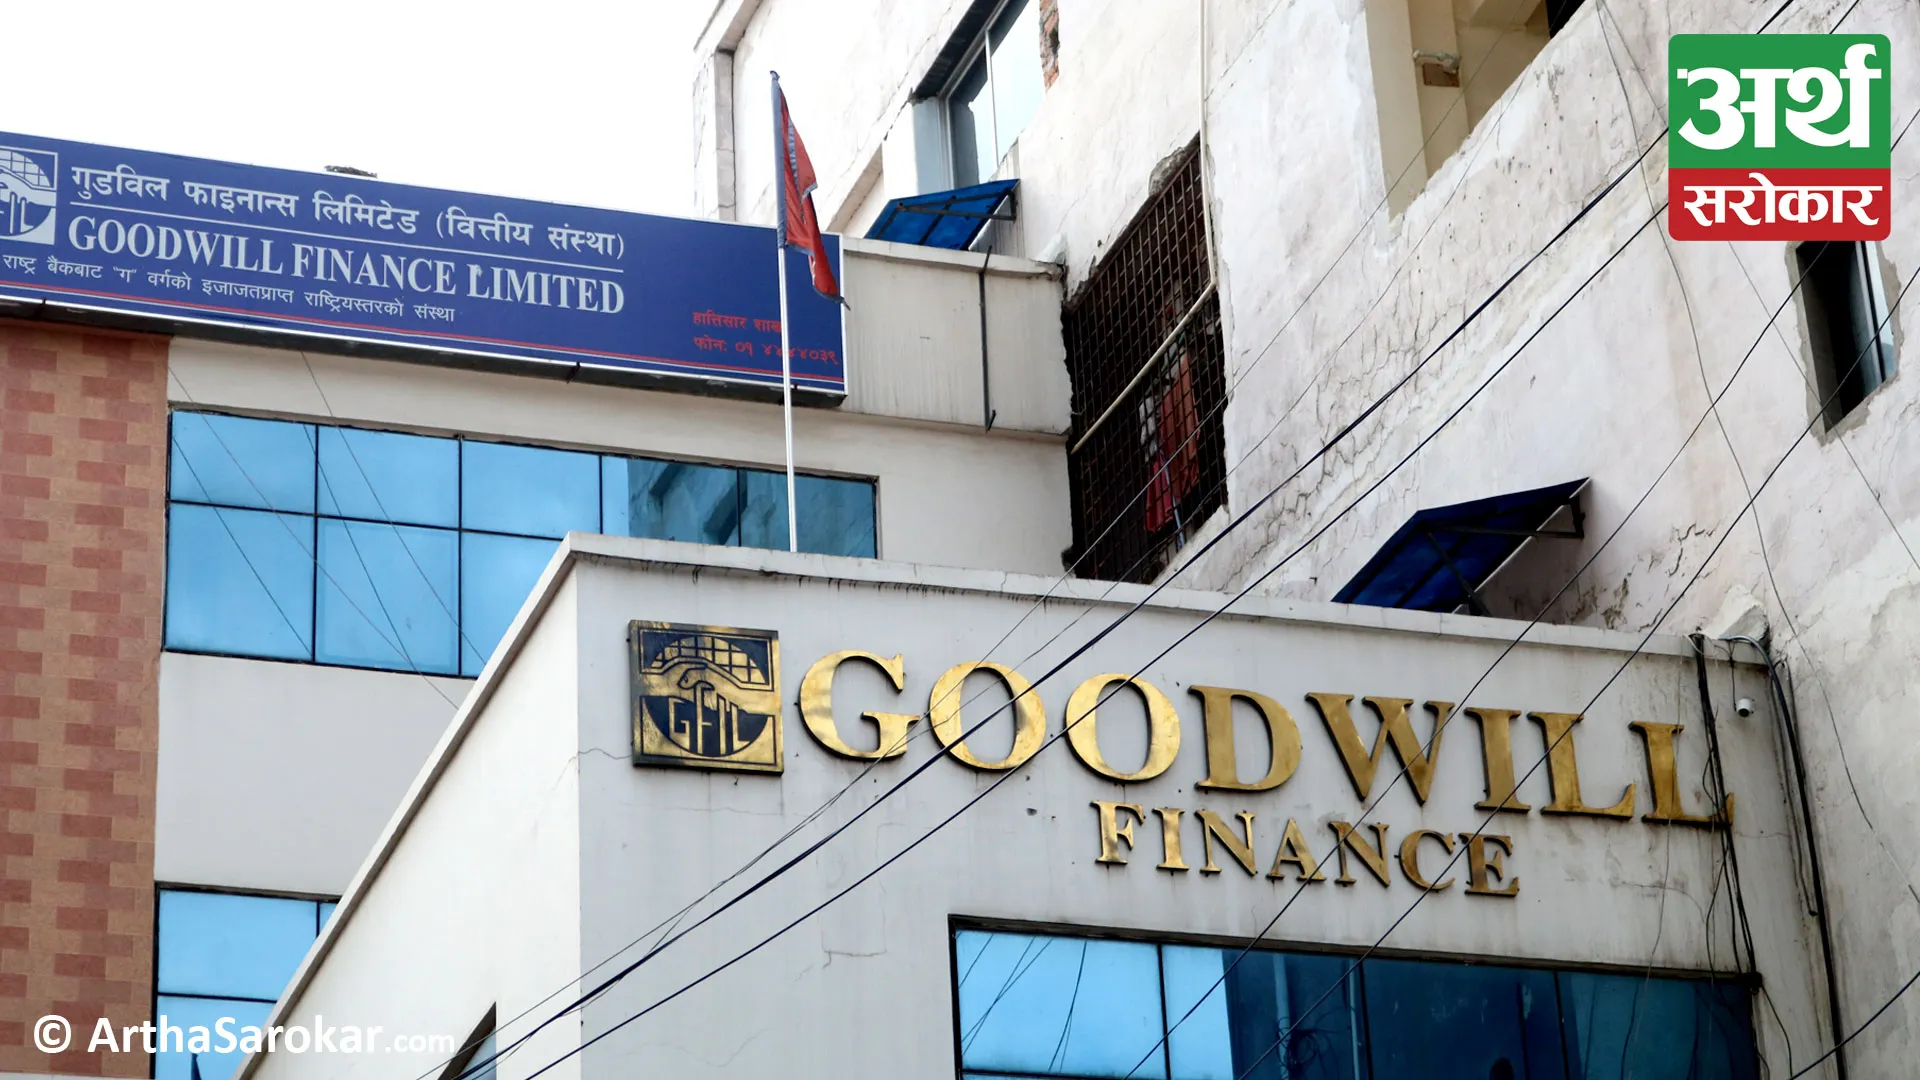 Nepal Rastra Bank takes action against Goodwill Financial for irresponsible lending practices